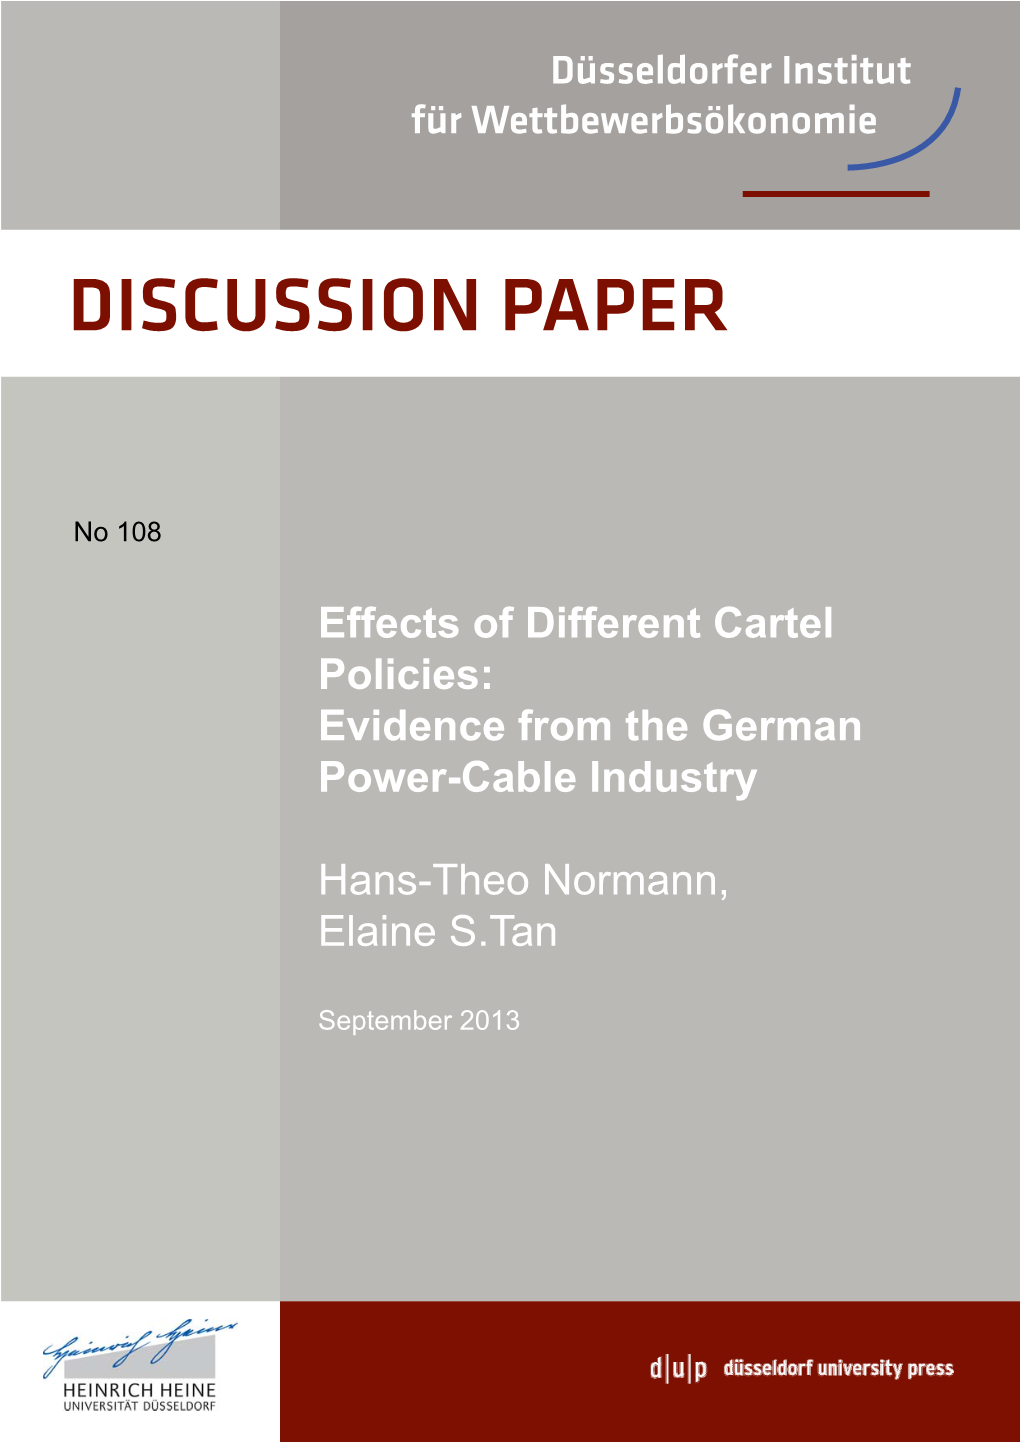 Effects of Different Cartel Policies: Evidence from the German Power-Cable Industry